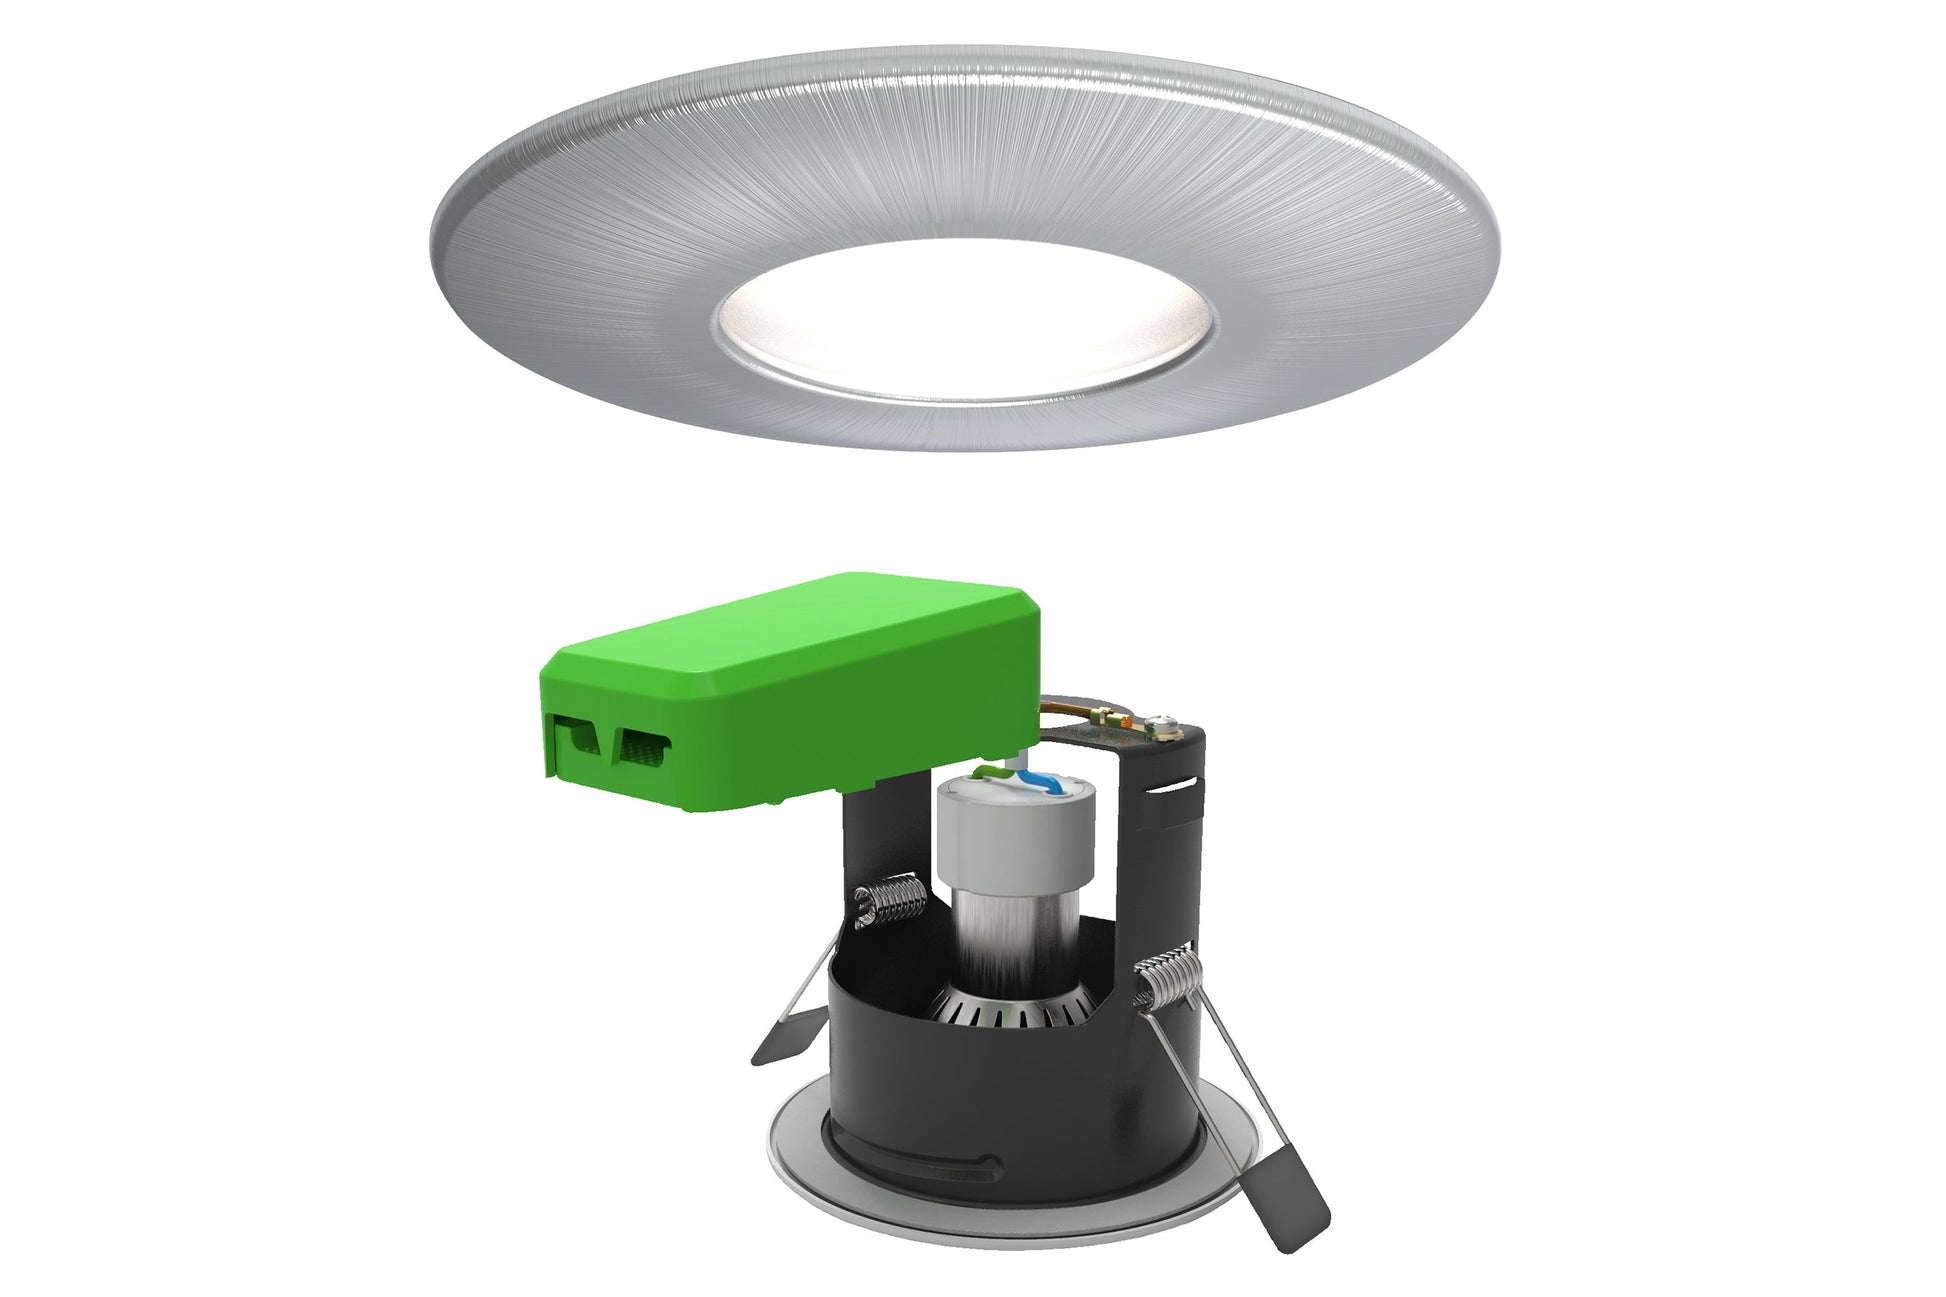 4lite WiZ Connected Fire-Rated IP65 GU10 Smart LED Downlight - Satin Chrome - maplin.co.uk